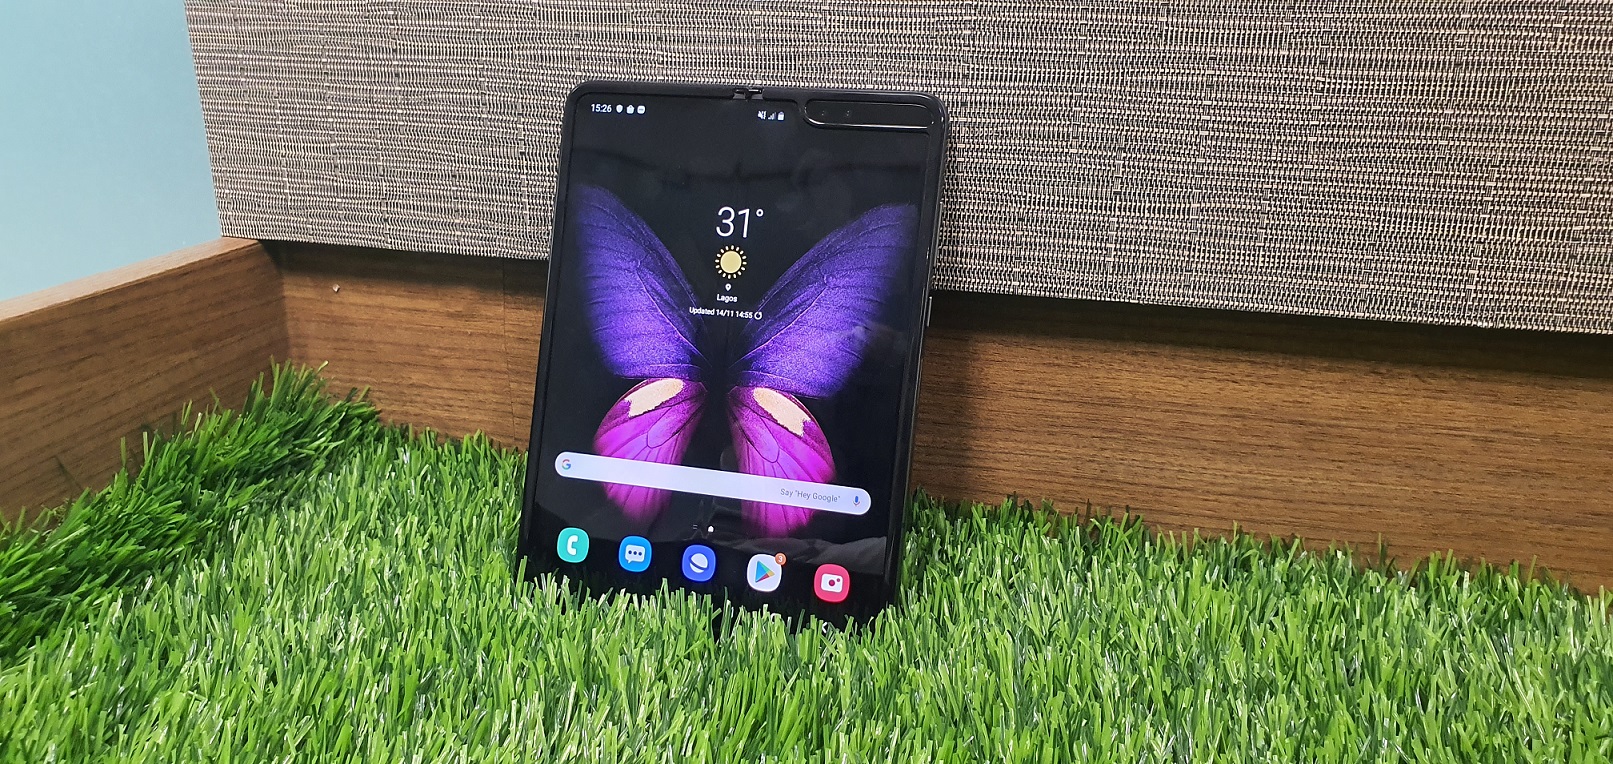 Samsung Unfolds the Future with a Whole New Mobile Category: Introducing Galaxy Fold